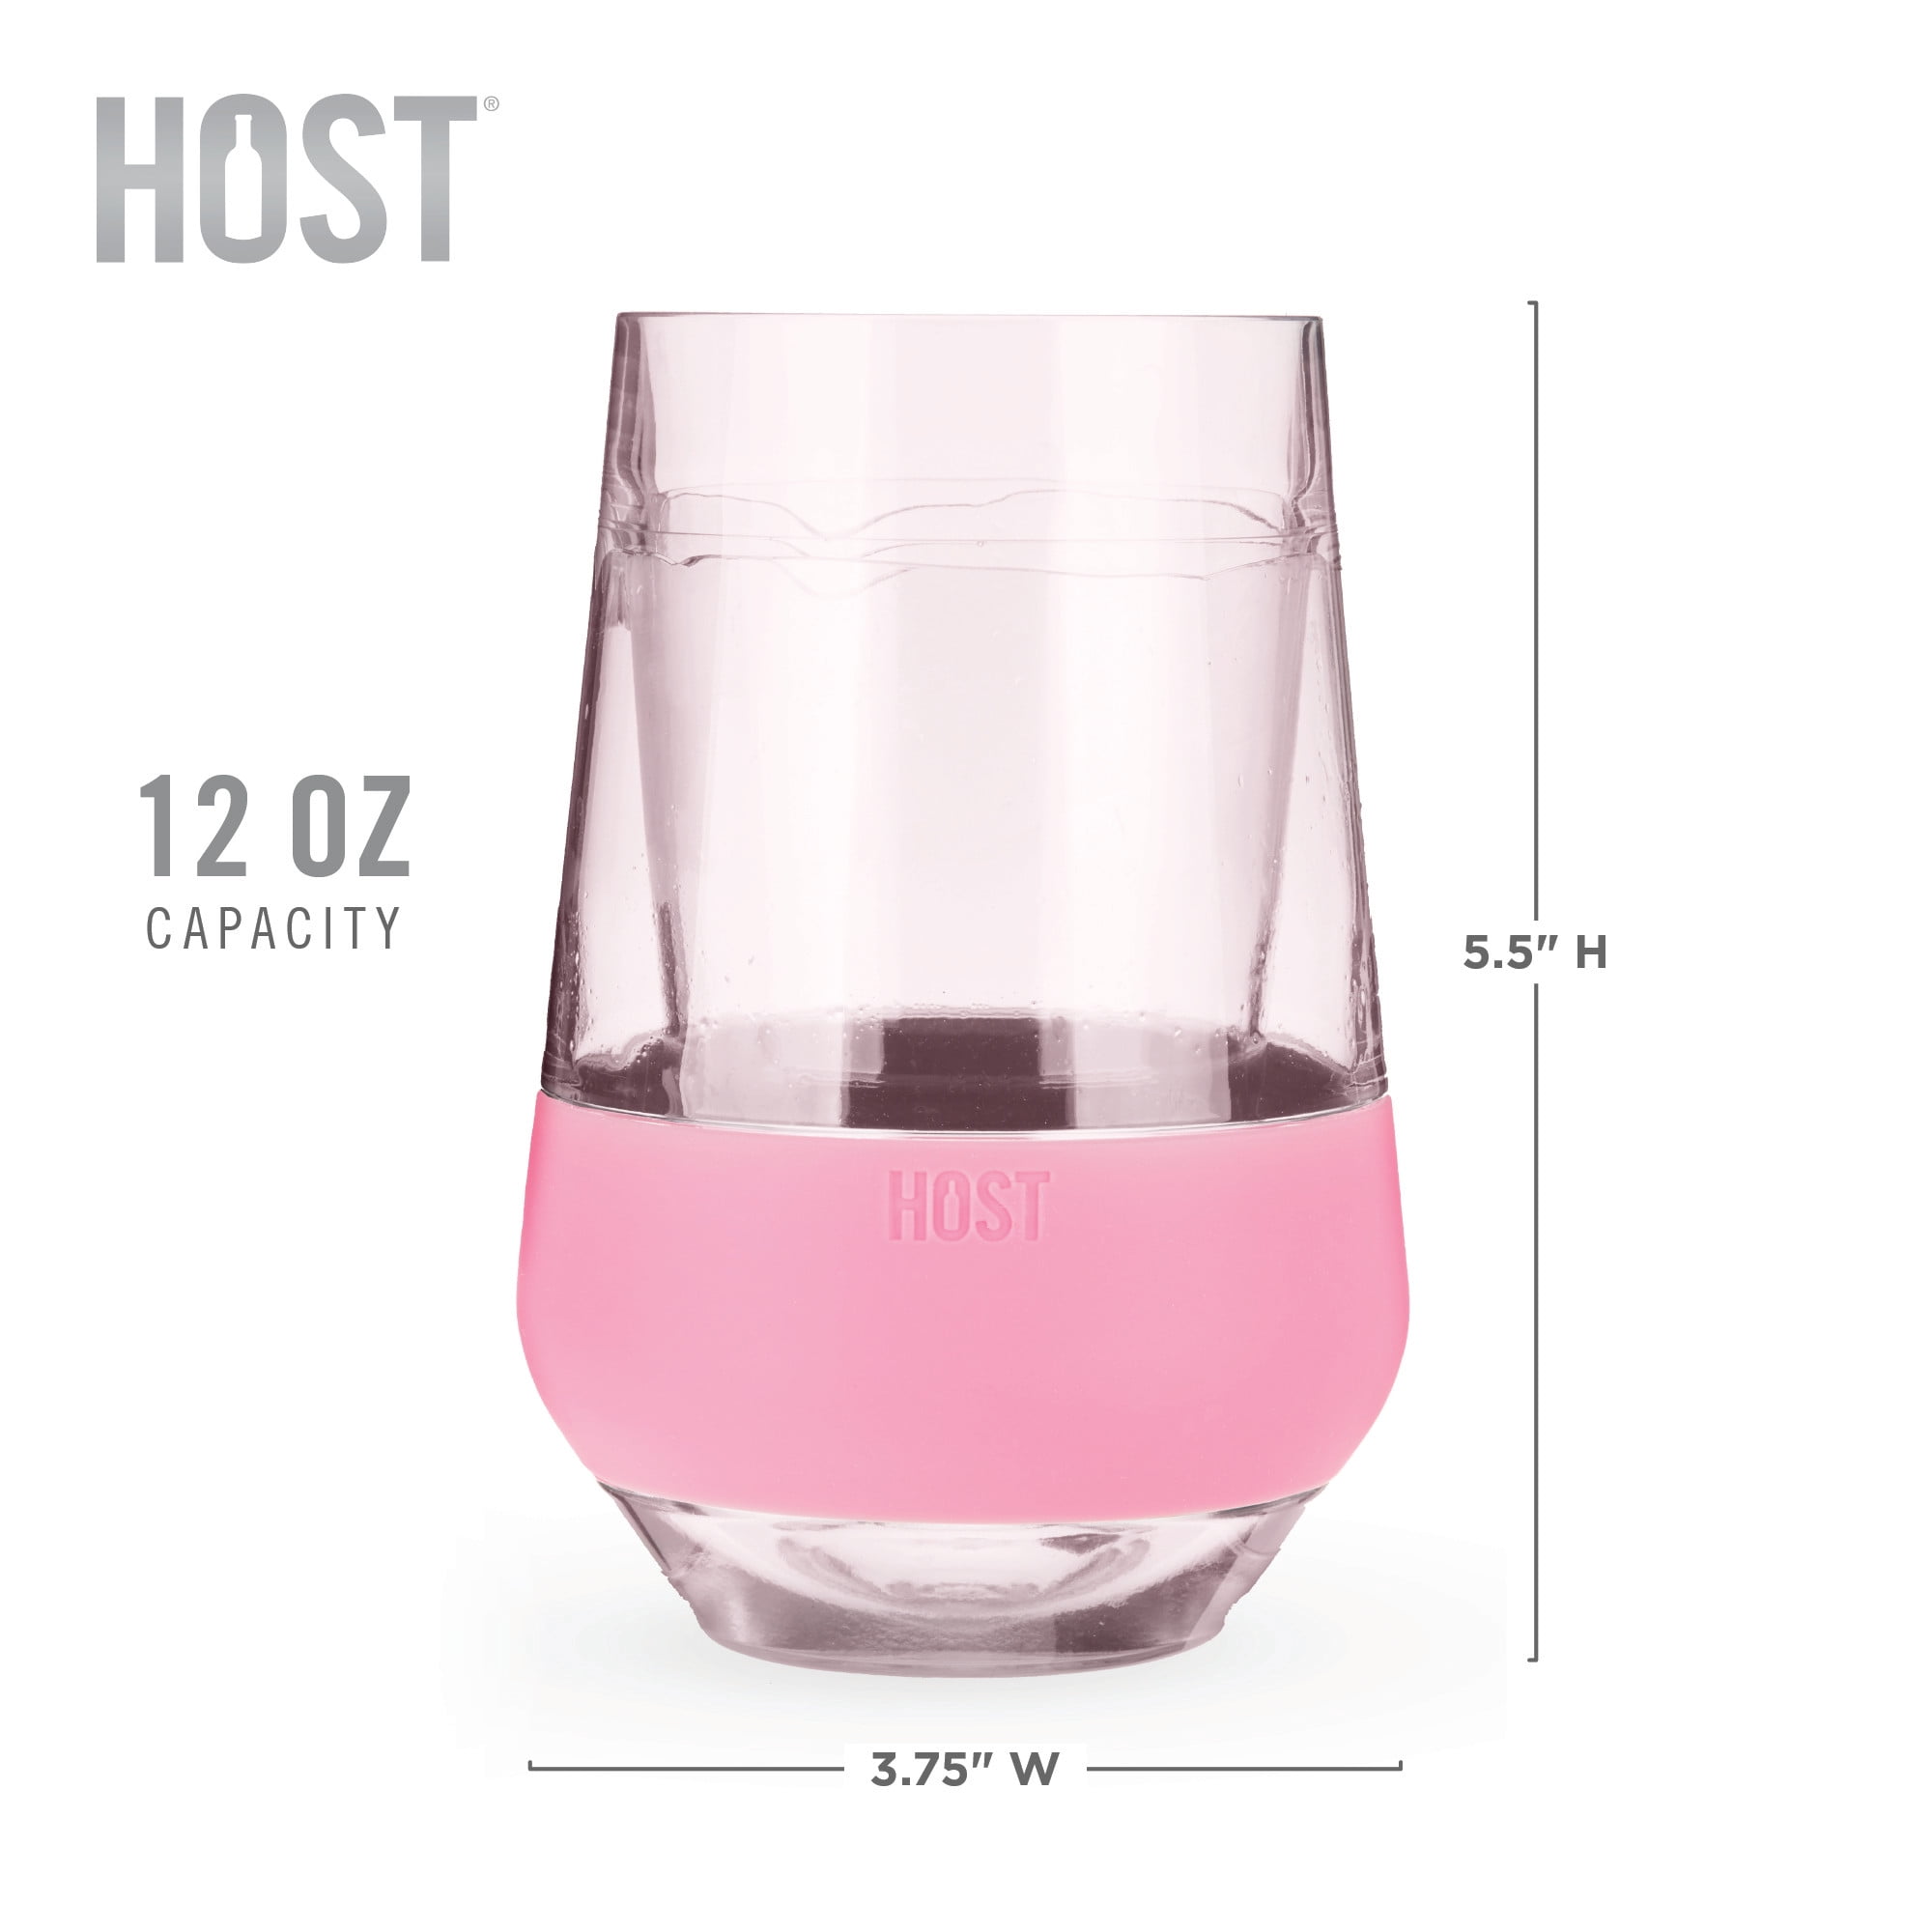 Pink Wine Freeze Cooling Cup — The Basketry